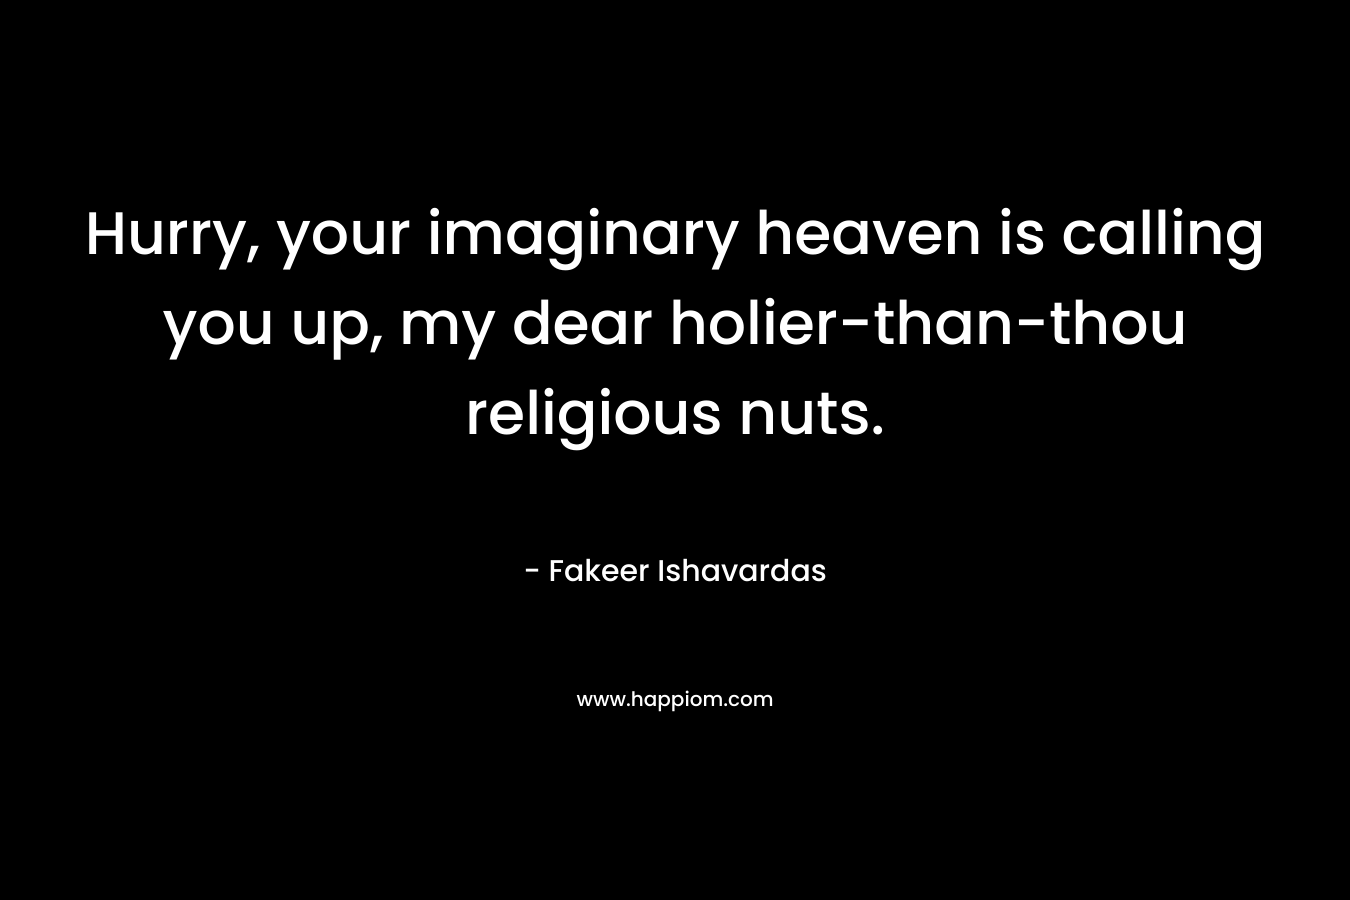 Hurry, your imaginary heaven is calling you up, my dear holier-than-thou religious nuts.